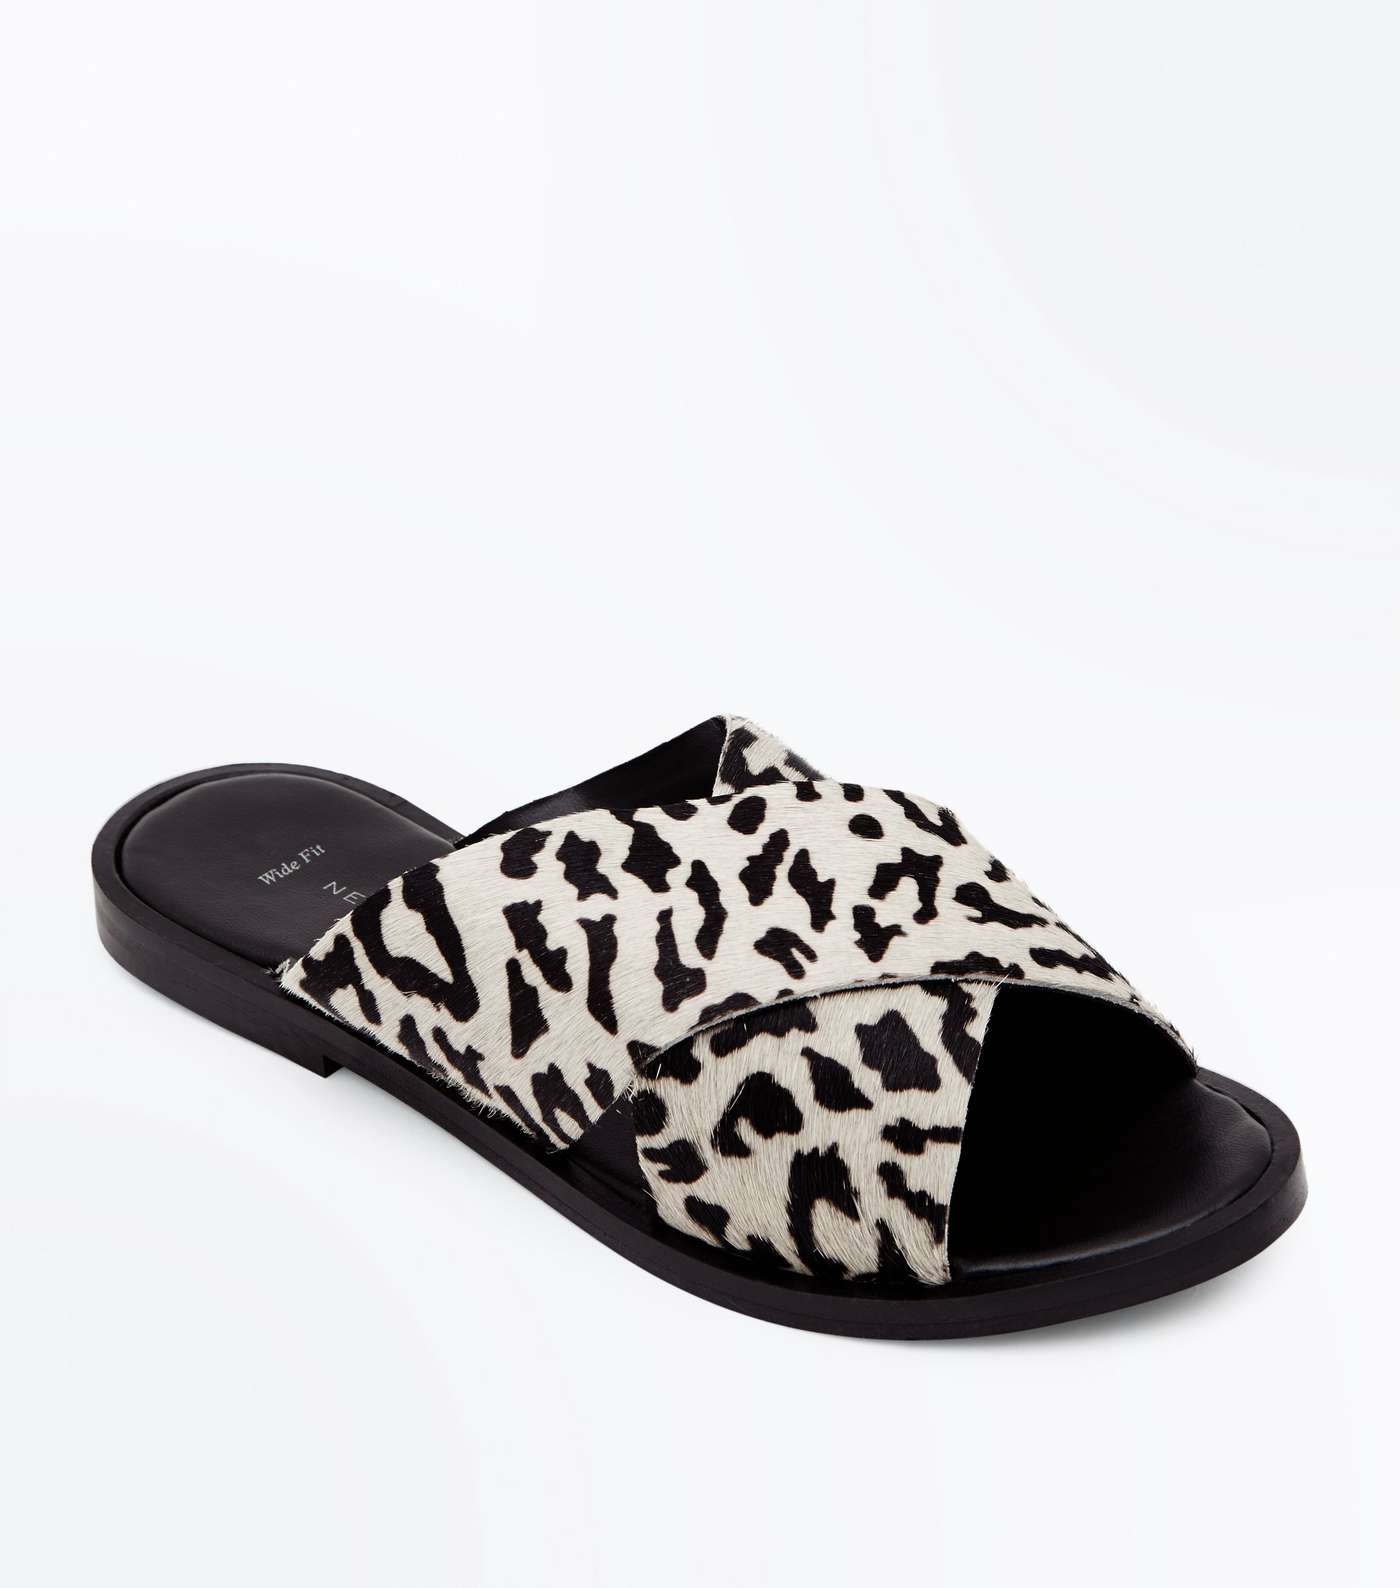 Wide Fit Cream Leather Leopard Print Sliders